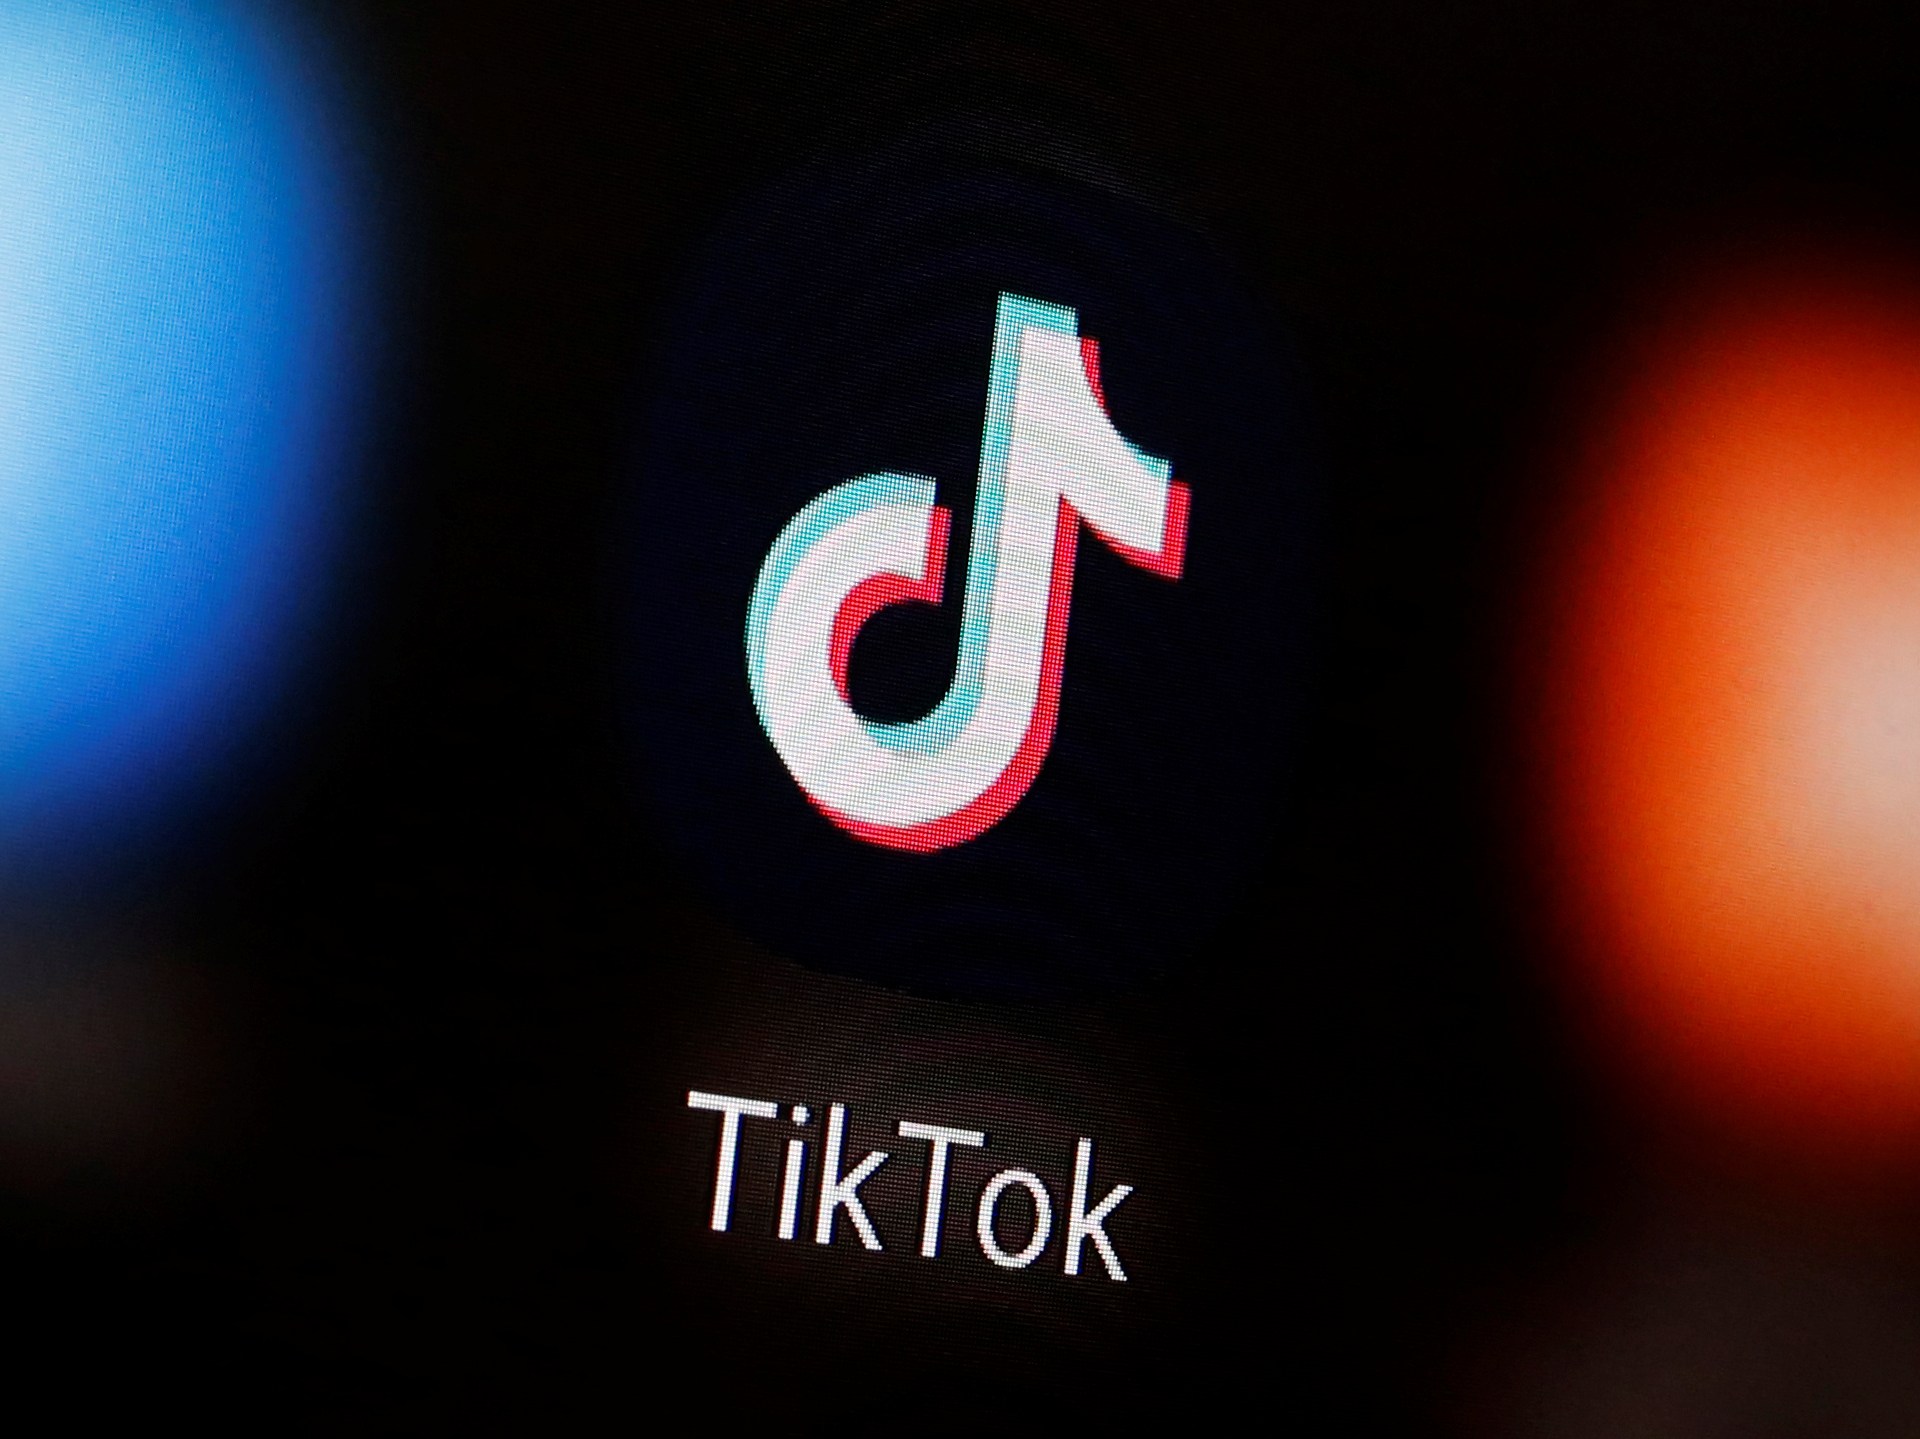 Will the 2024 US election save TikTok from near-death?